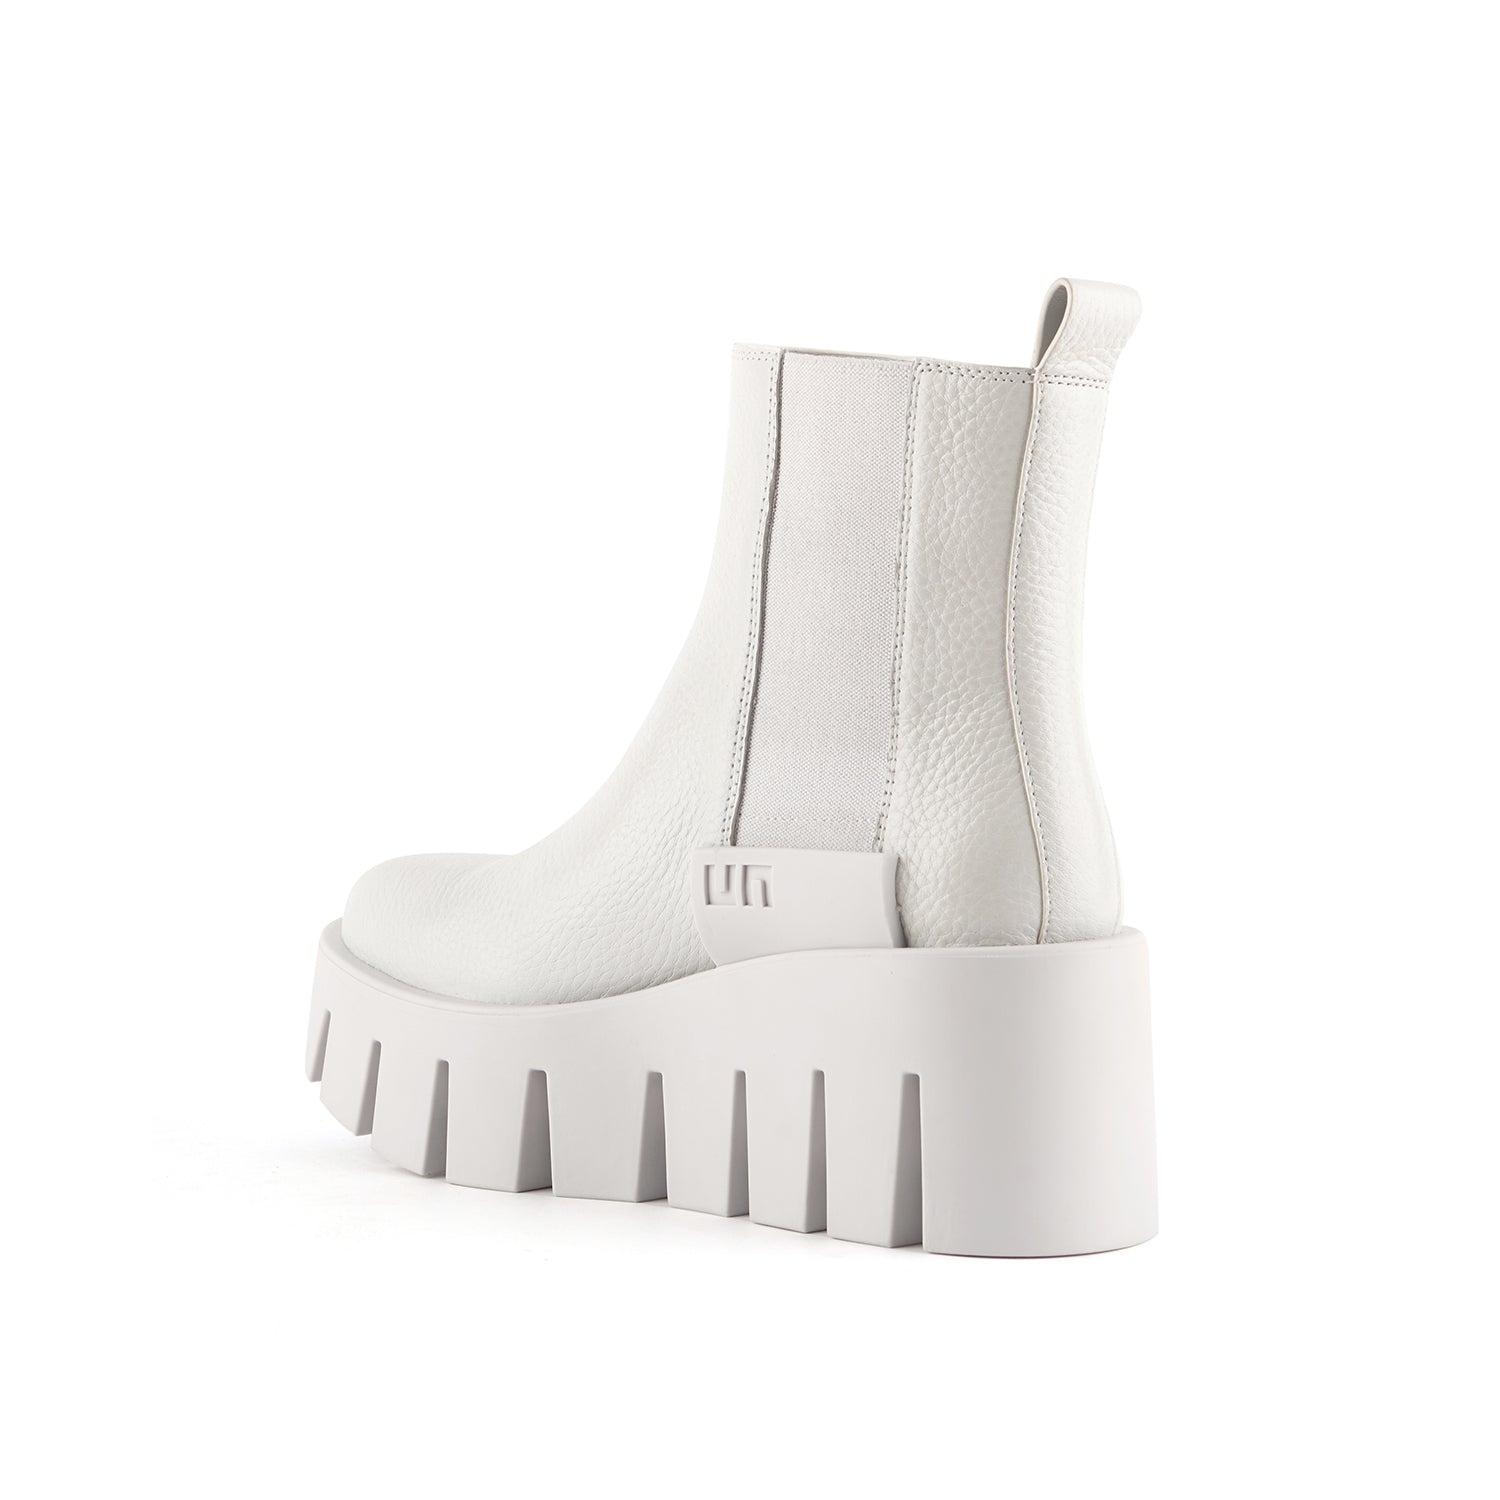 inner back side view of the united nude grip chelsea lo boots. These boots are white/light grey colored. The boots have elastic goring on the sides and a lug wedge platform sole.